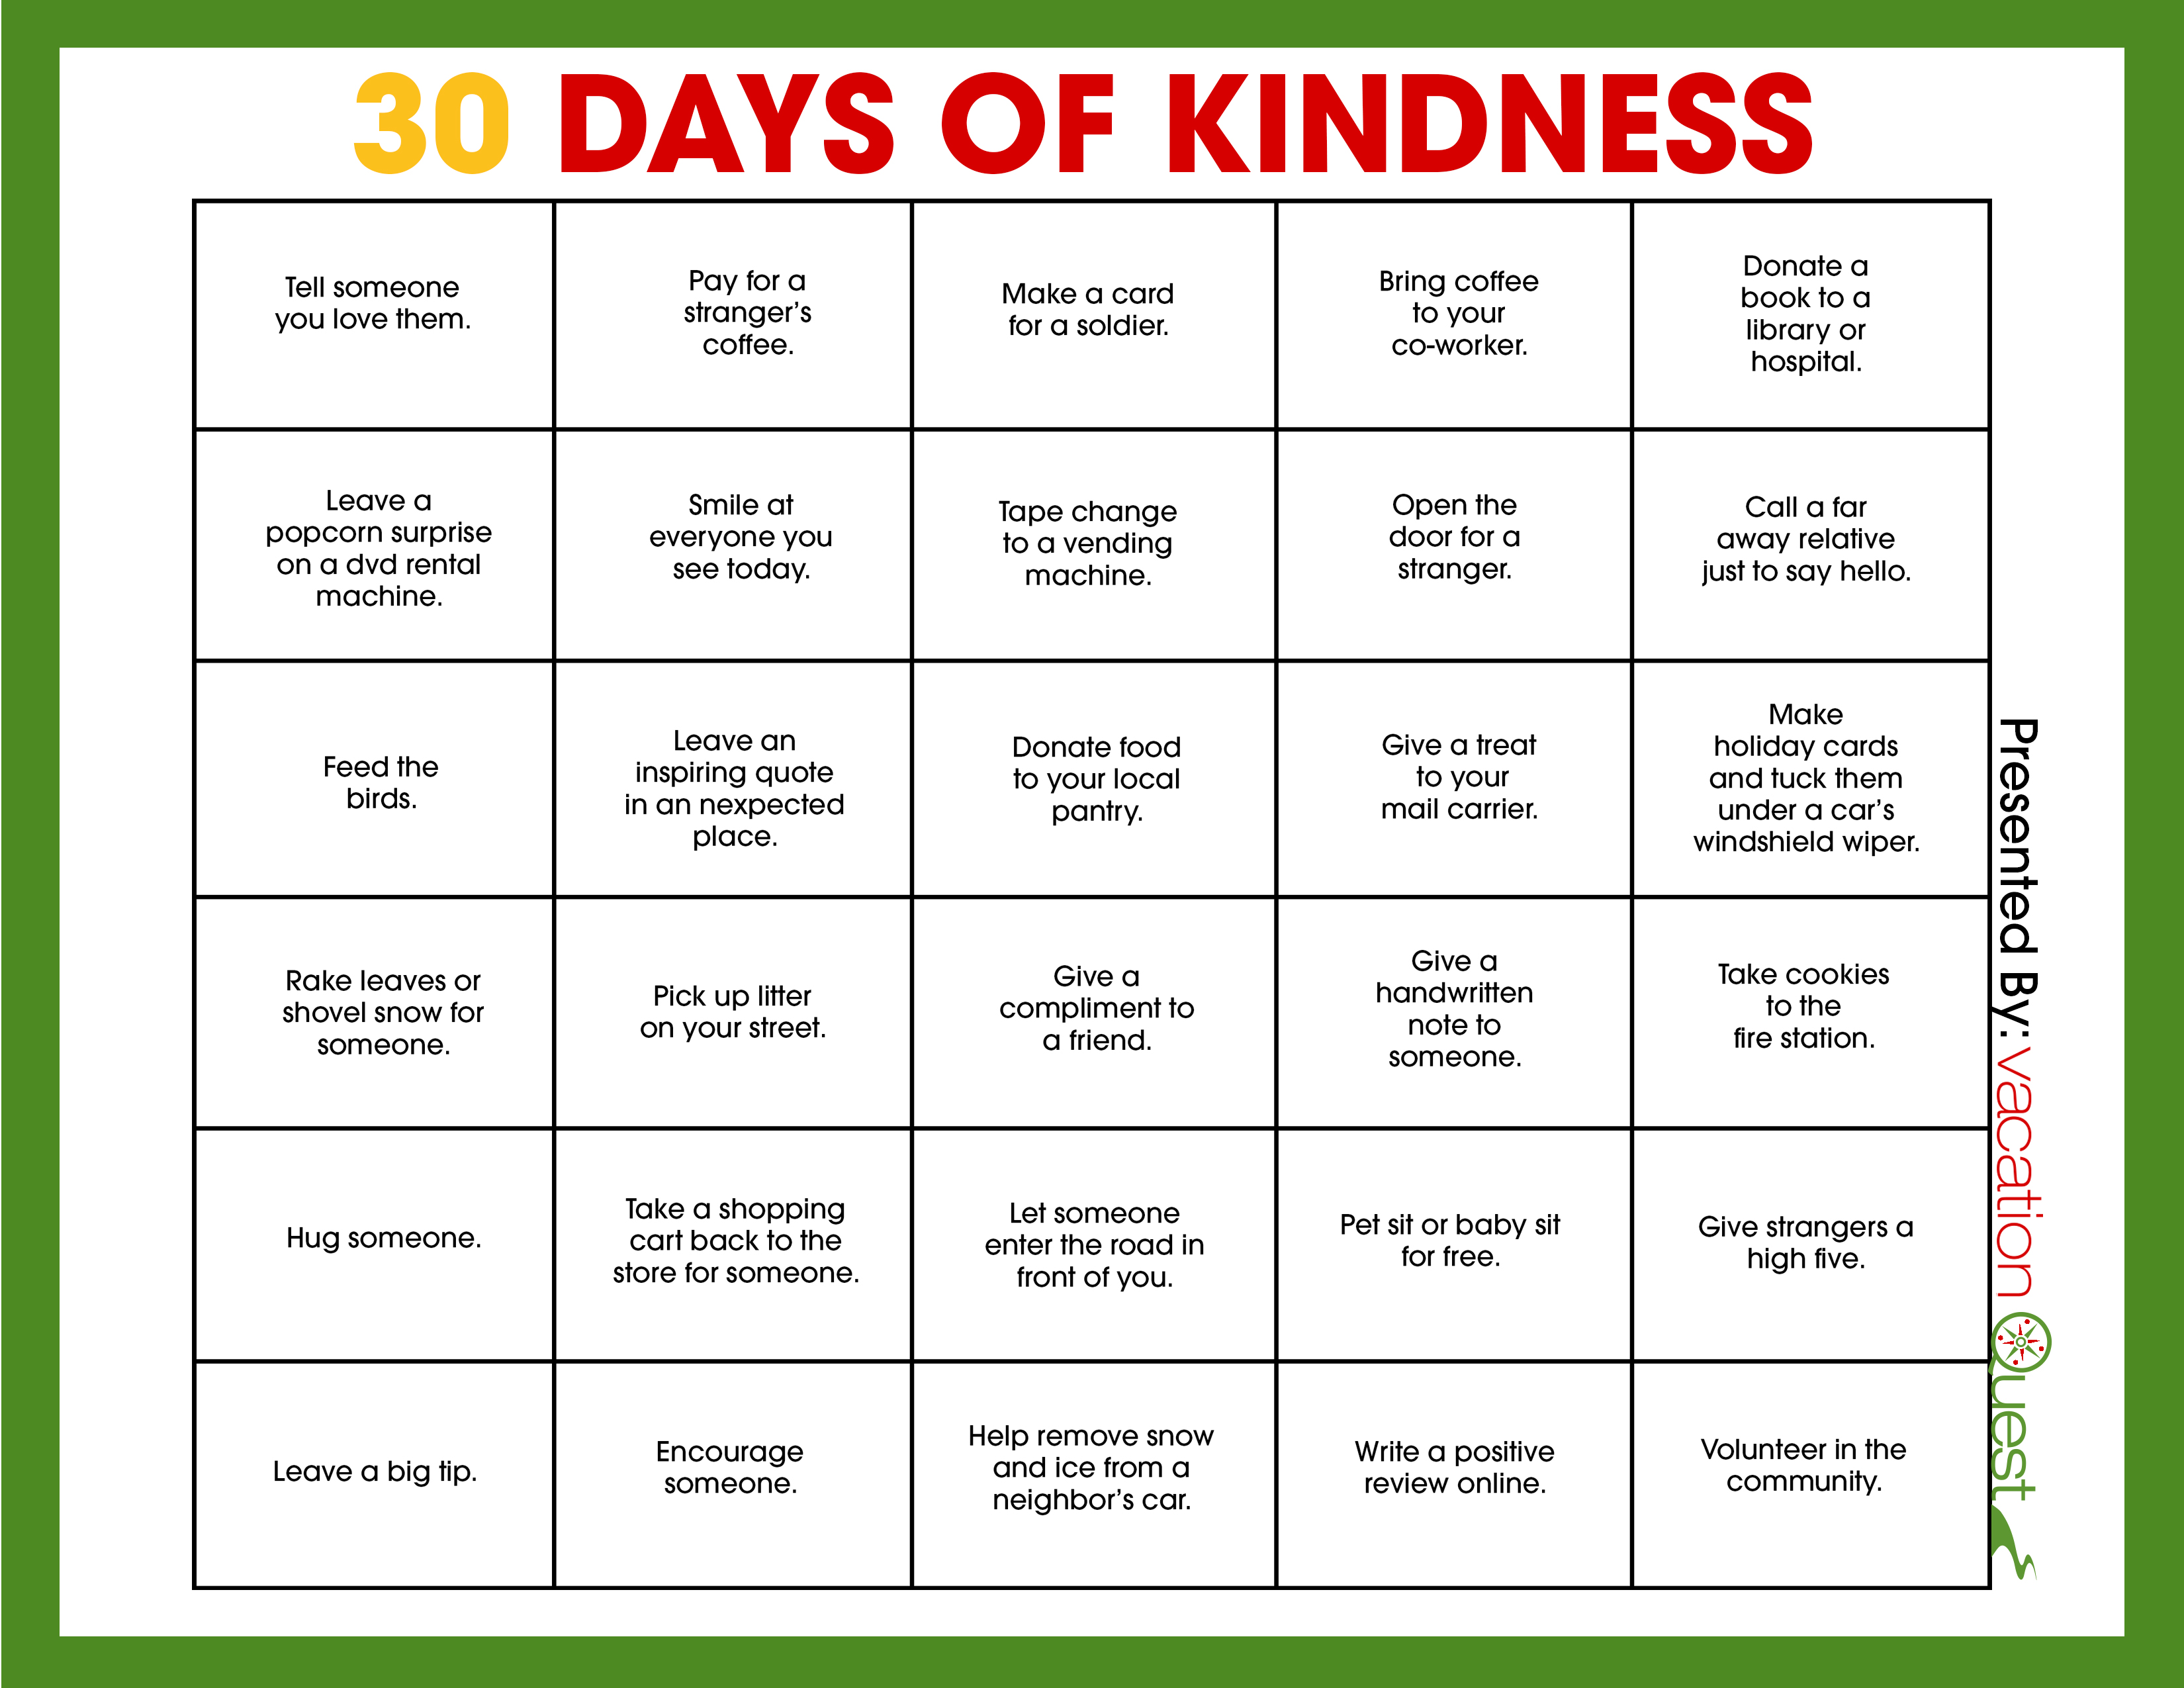 30 Days of Kindness Countdown Starts Now Digital Vacation Quest Blog